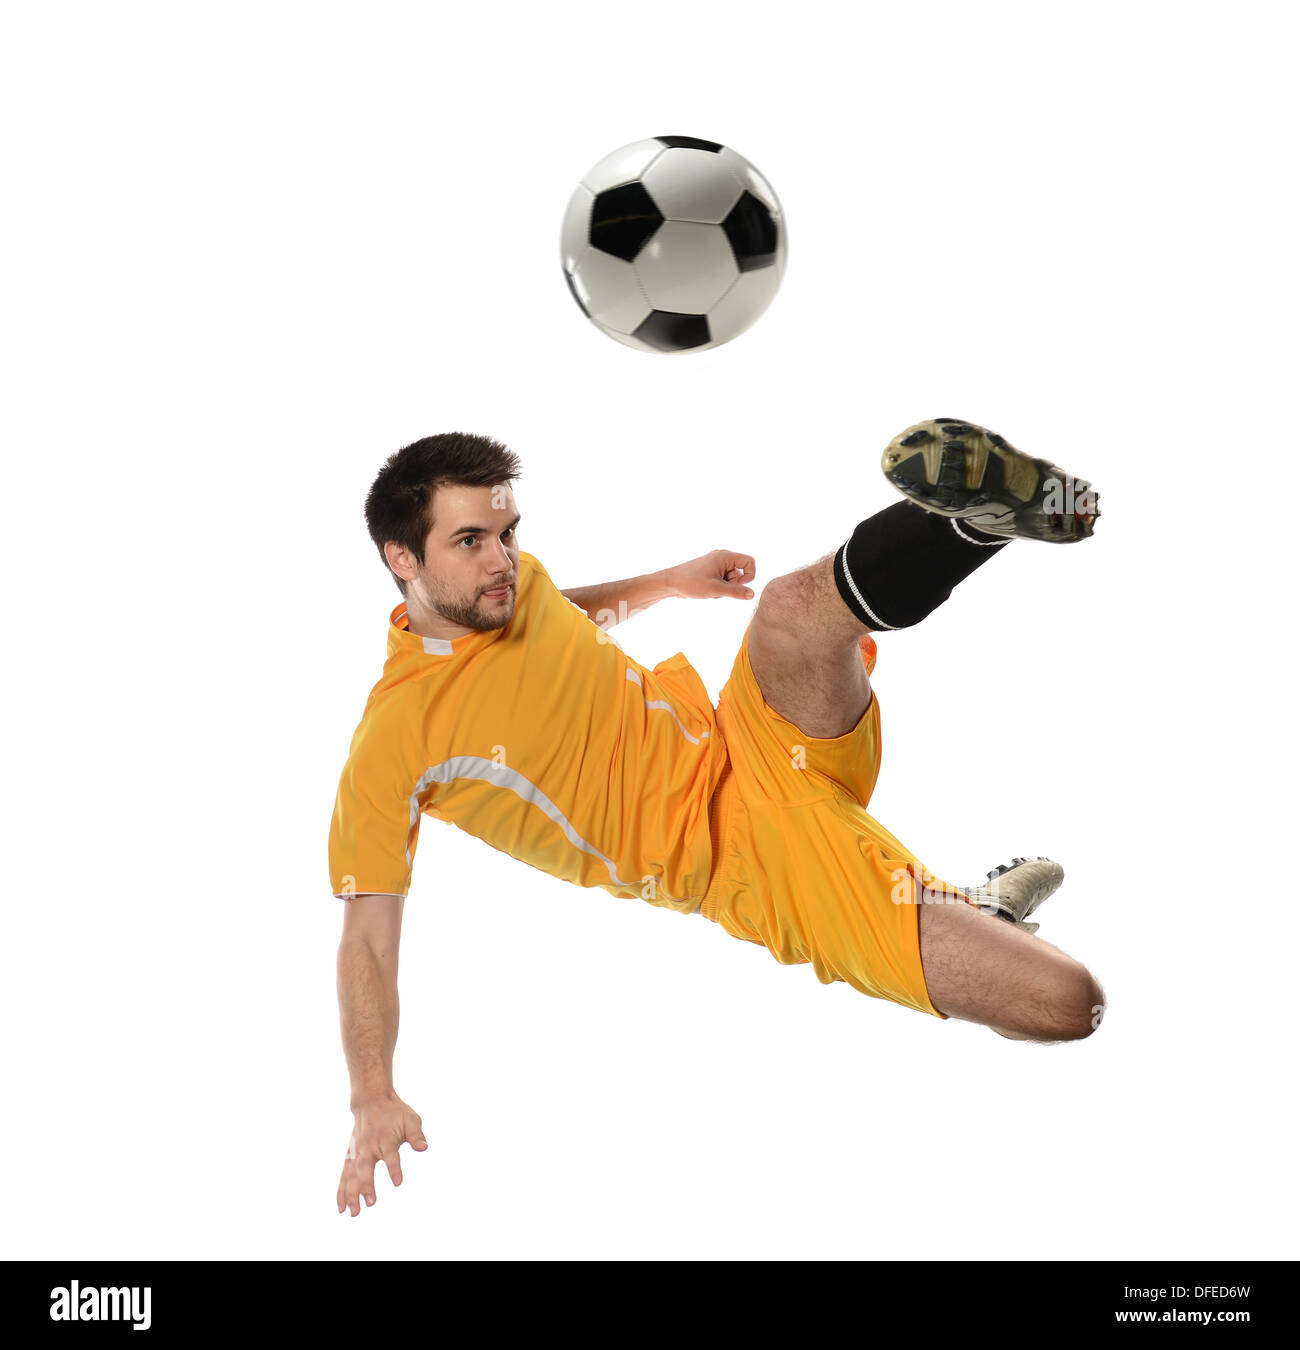 Soccer player in action isolated over white background Stock Photo